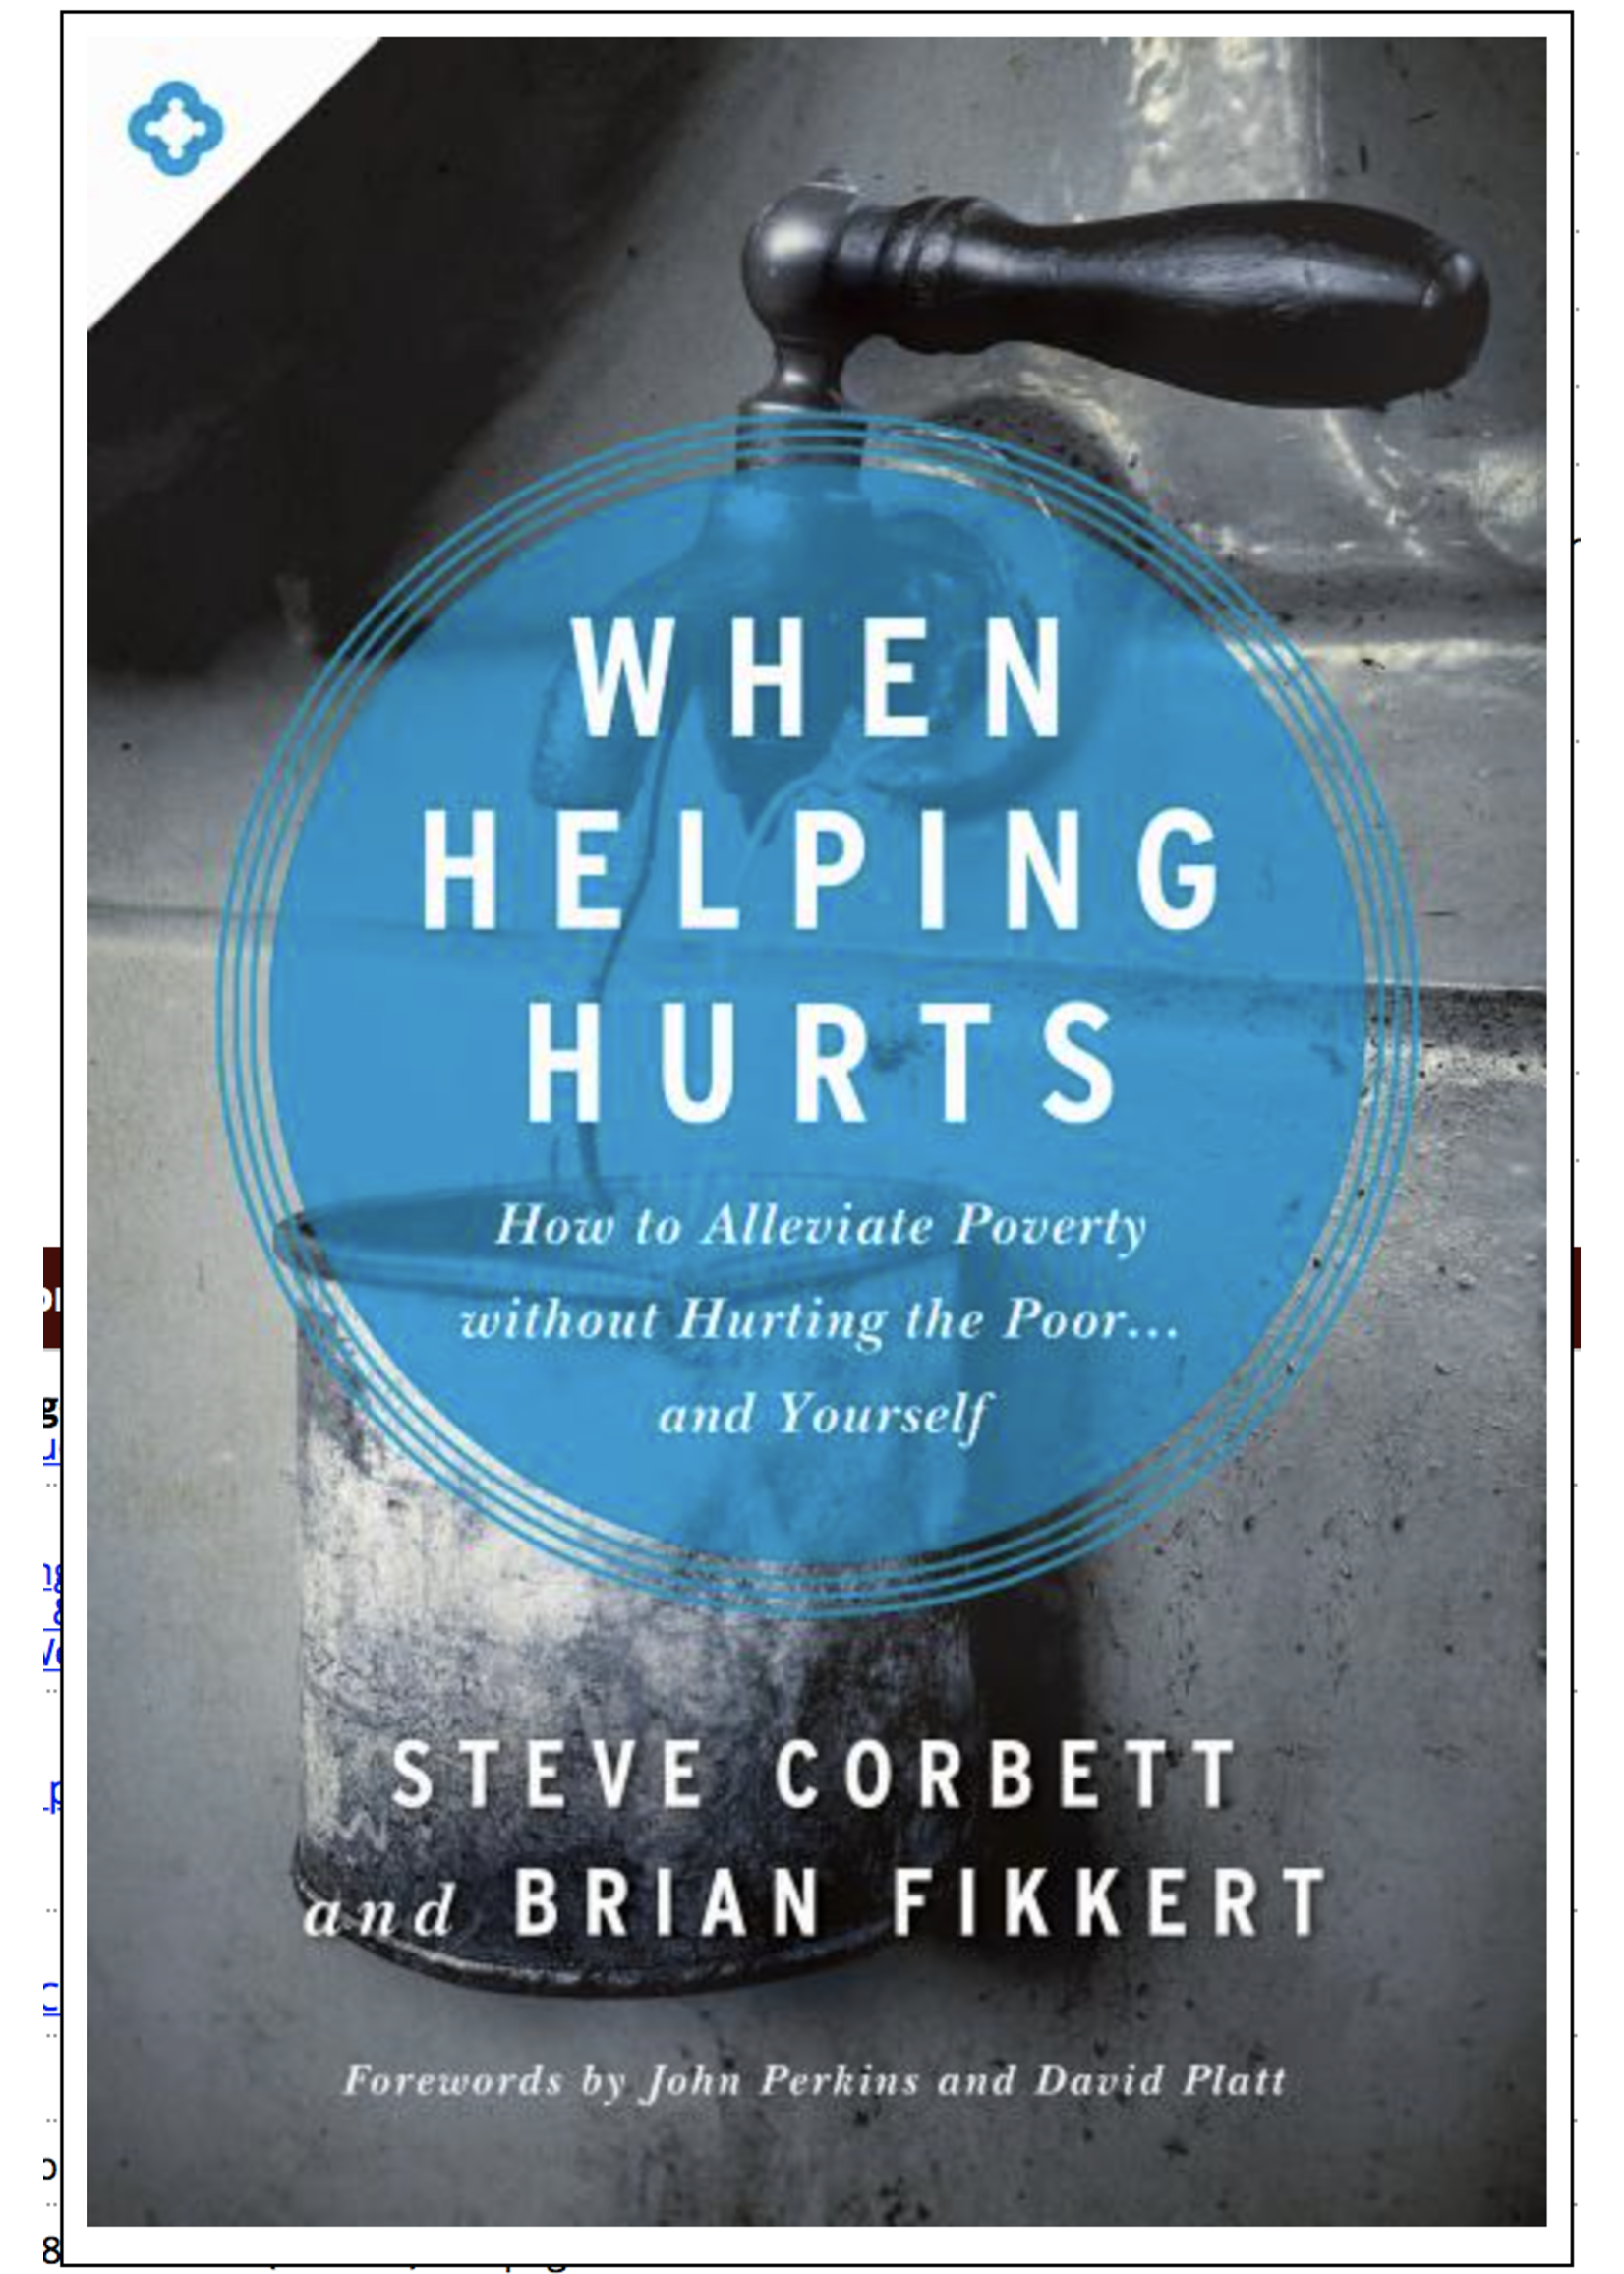 Corbett, Seve & Fikkert, Brian When Helping Hurts: How to Alleviate Poverty Without Hurting the Poor... and Yourself